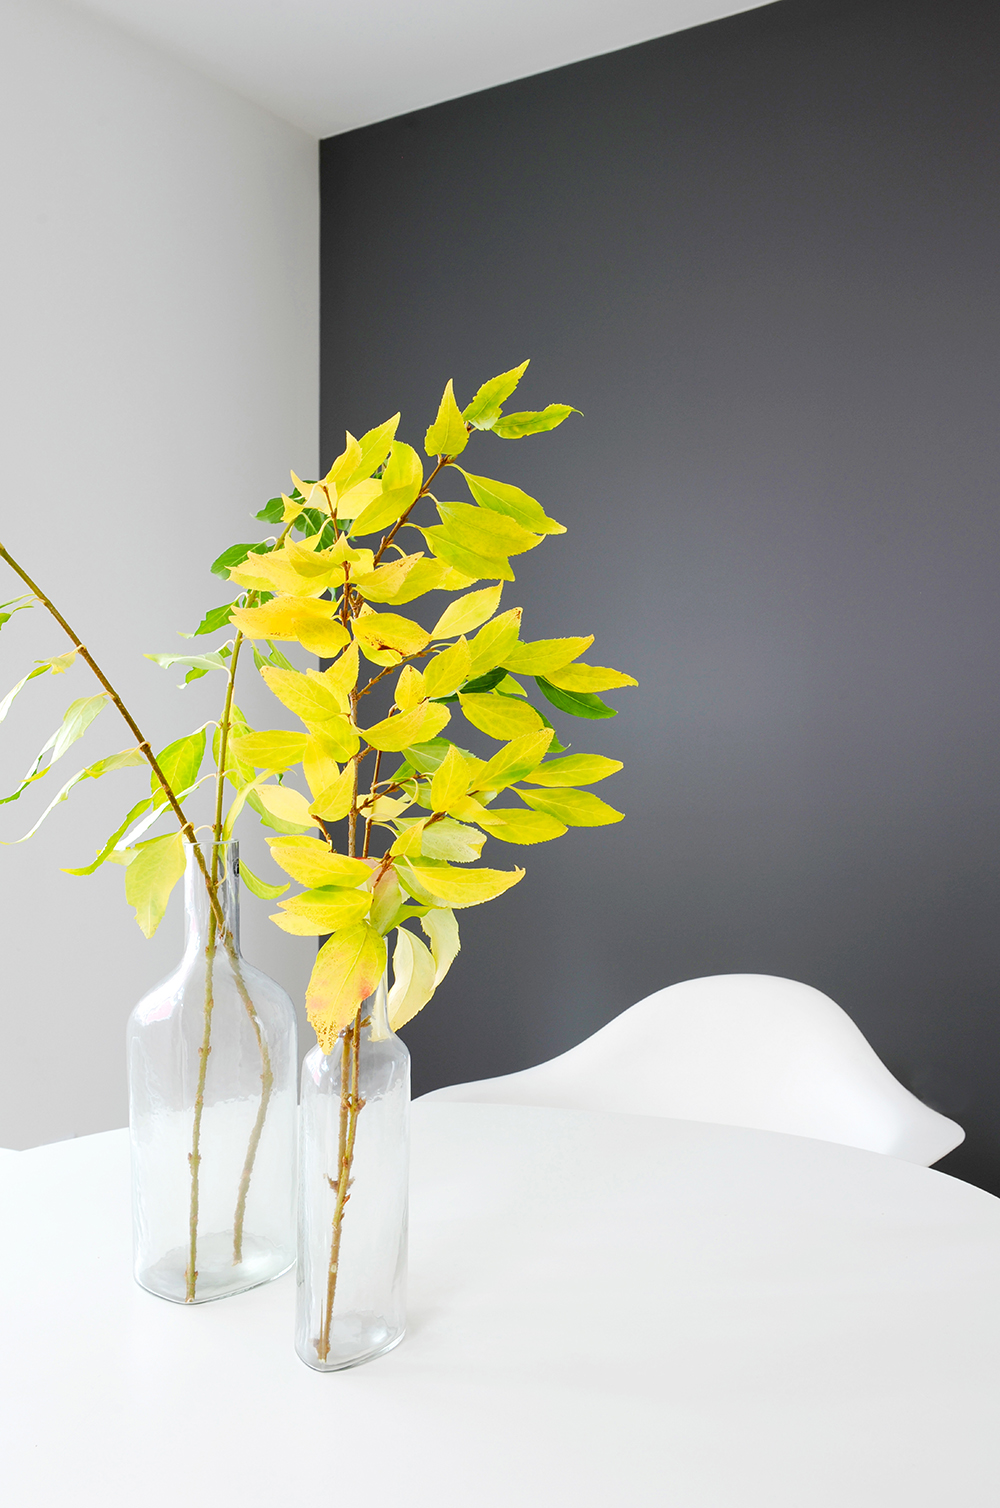 Simple arrangements of leafy branches sit on a simple kitchen table.